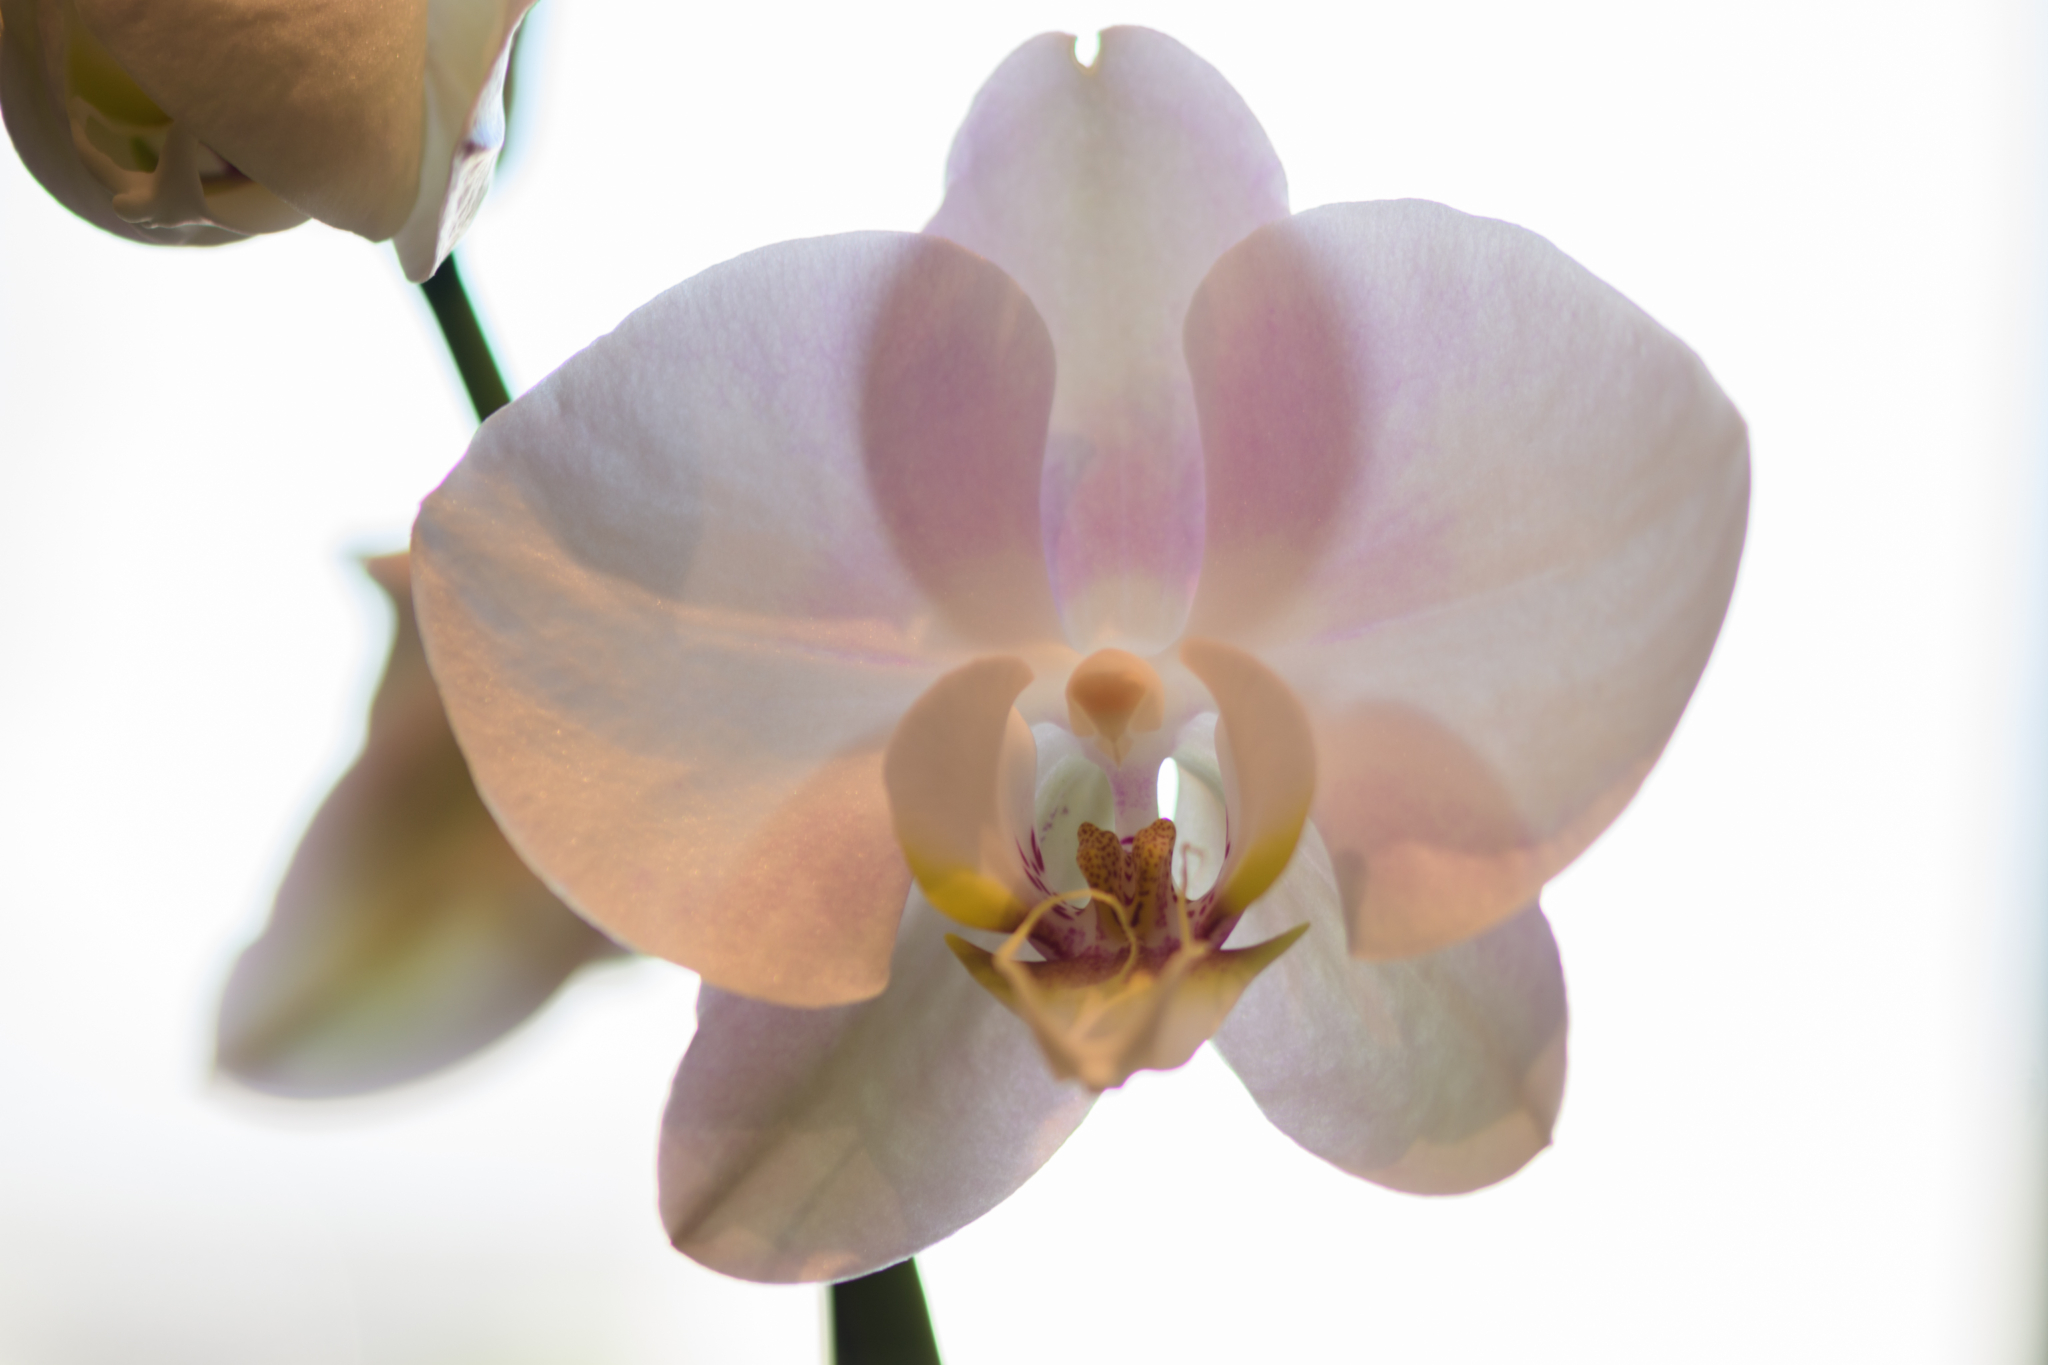 DorothyMcDaniel 20210413 103022 [PHOTOS] Flower power: 7 shops to get your next orchids